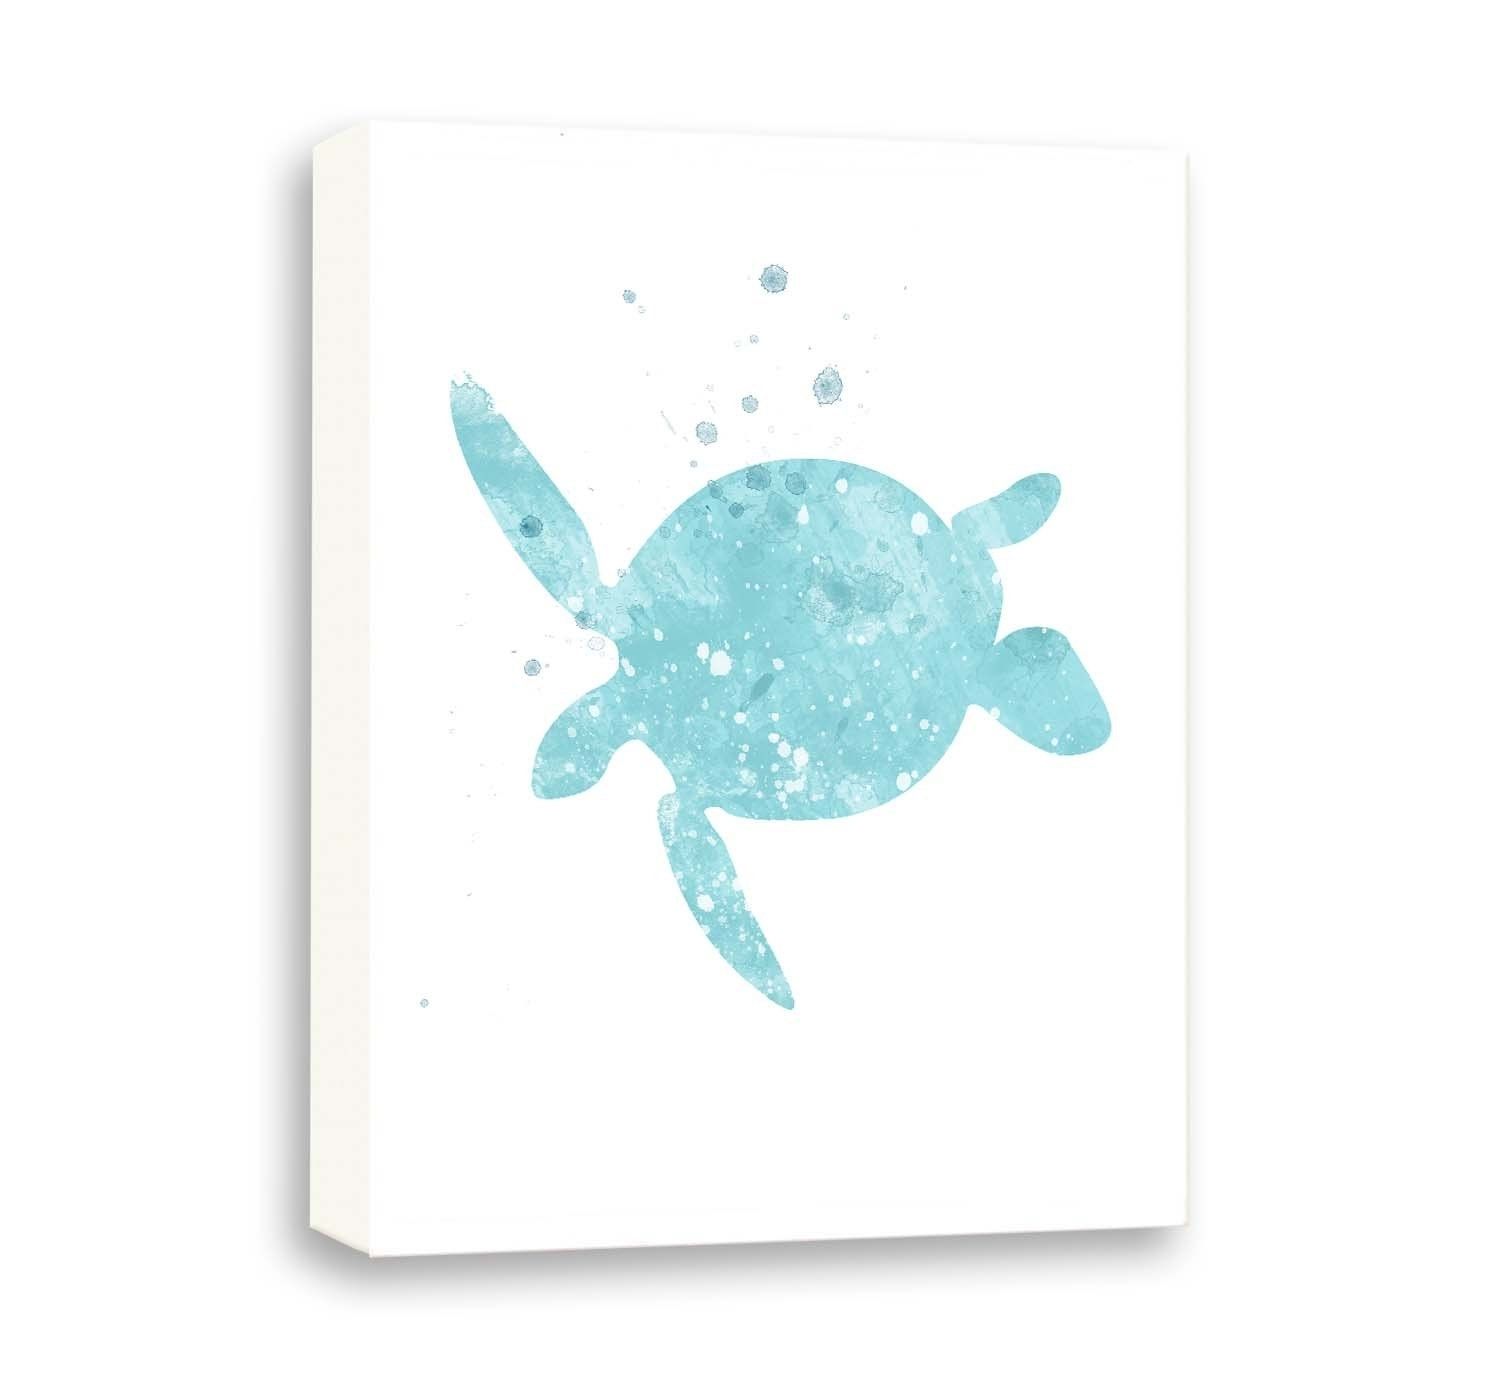 Sea Turtle Art, Watercolor Wall Art, Canvas Art, Bathroom Art Within Newest Sea Turtle Canvas Wall Art (View 15 of 20)